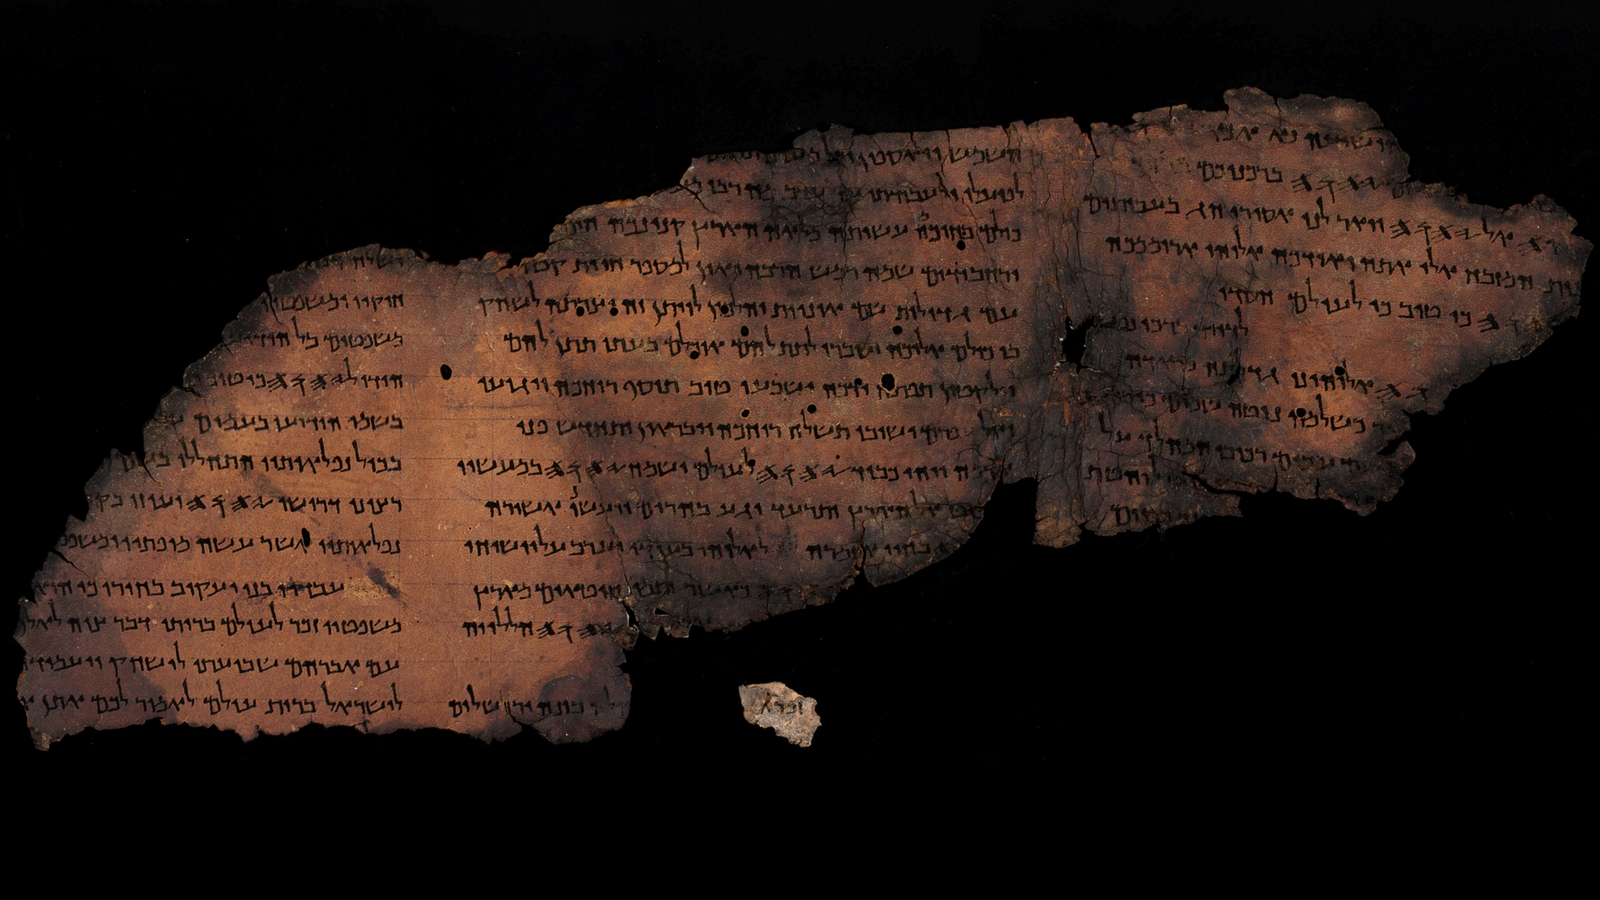 The Great Psalms Scroll (11Q5) together with the new fragment containing Psalm 147:1. Photo by Shai Halevi/Leon Levy Dead Sea Scrolls Digital Library